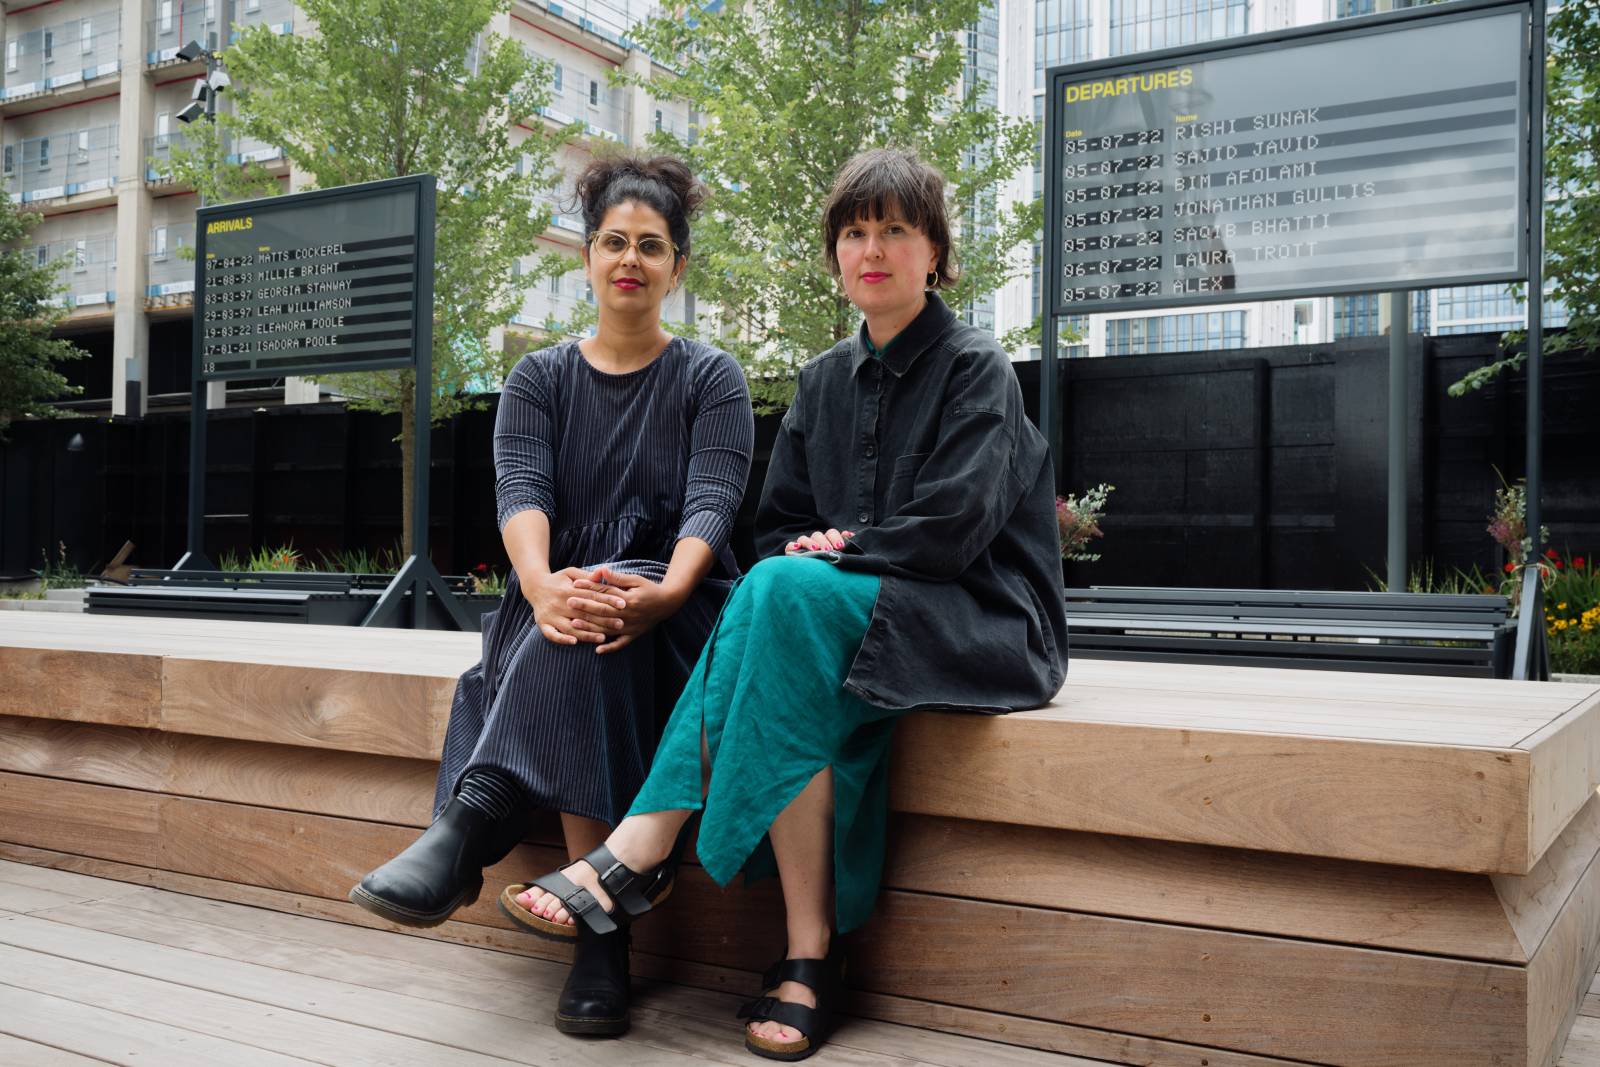 YARA + DAVINA sat on a wooden bench in front of arrivals and departures boards at a courtyard in Nine elms, Embassy Garden